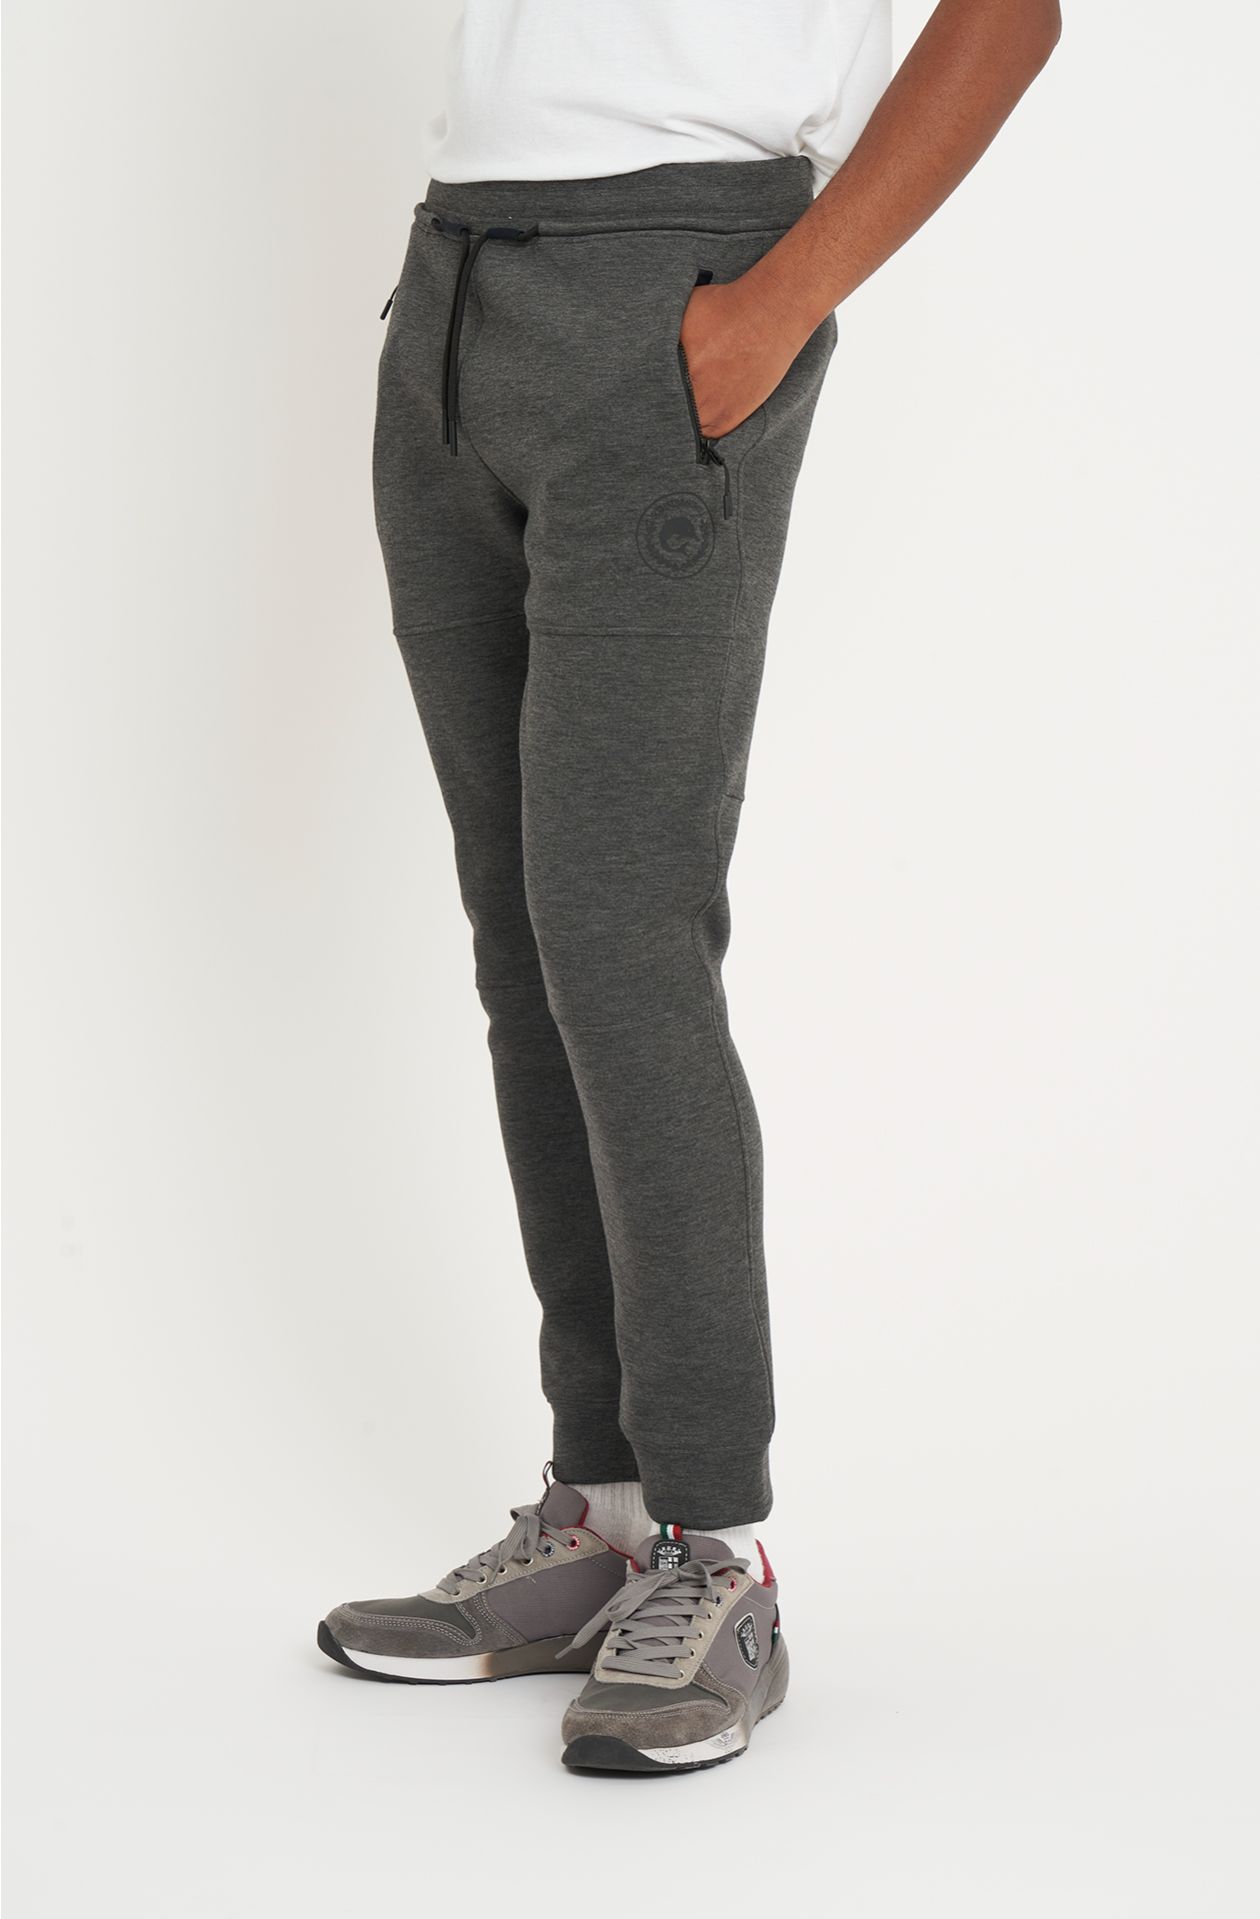 Technical style joggers